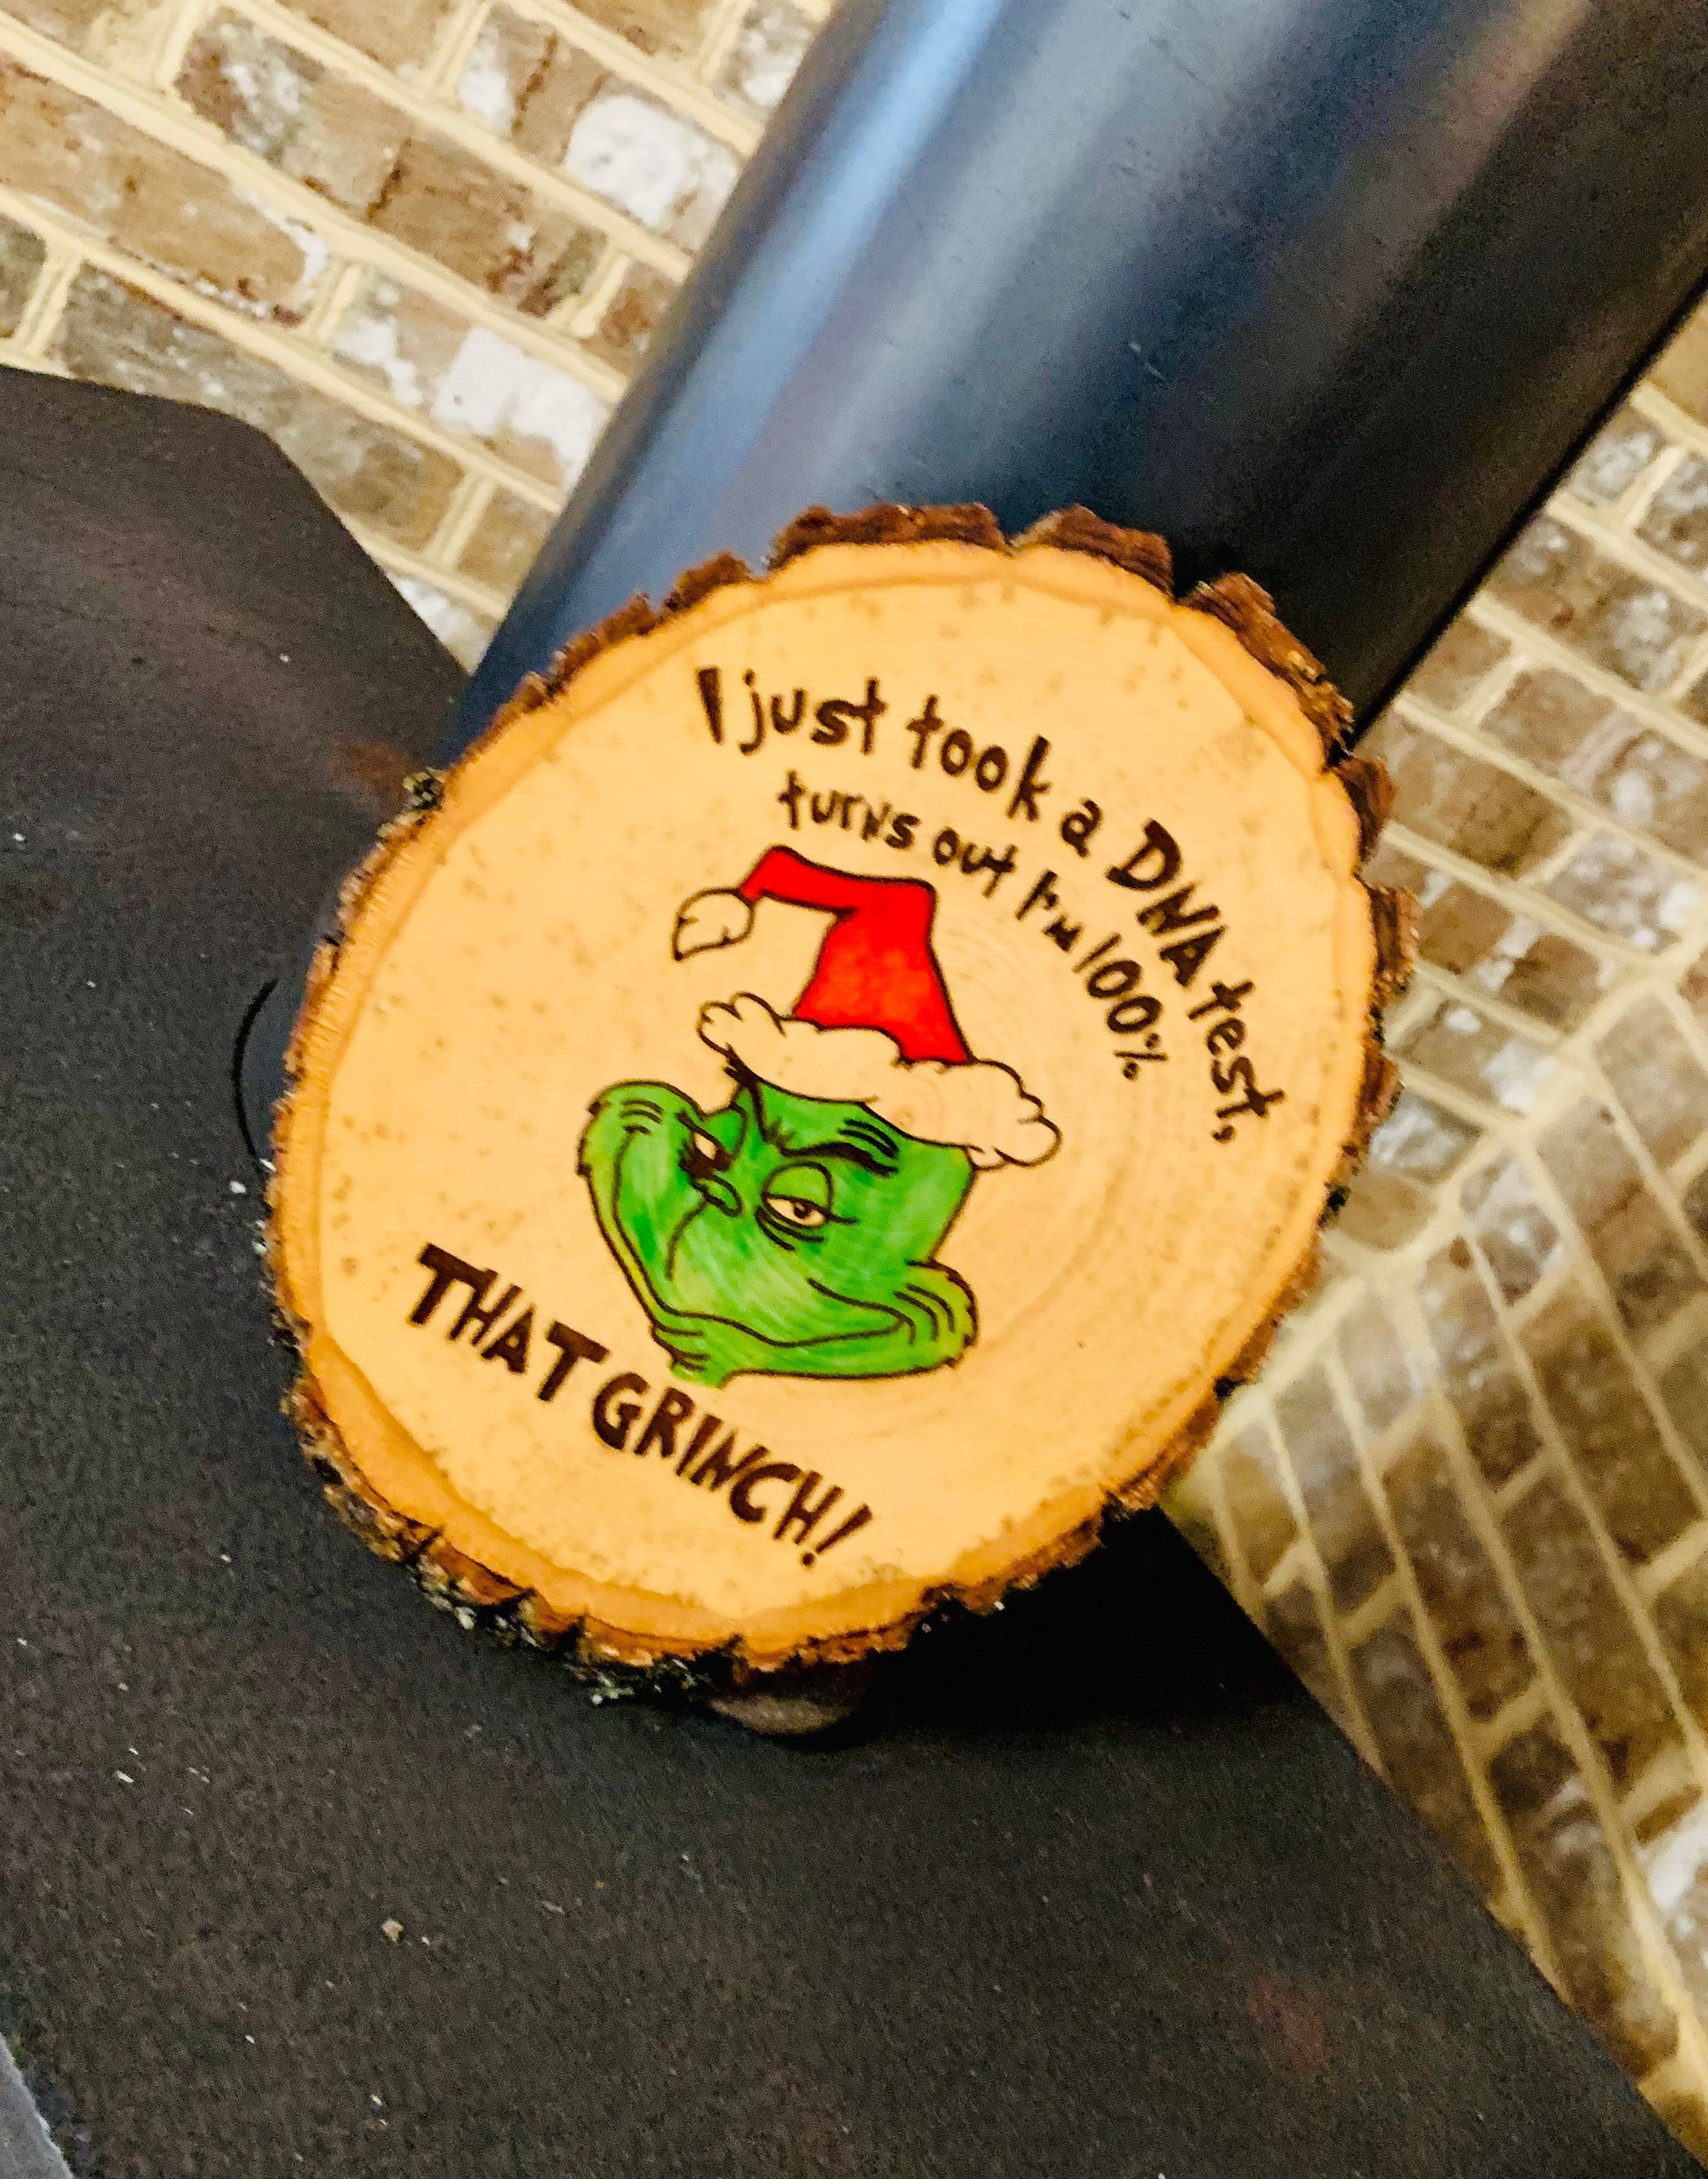 I Just Took A DNA Test I'm 100% That Grinch Live Edge Wood Sign